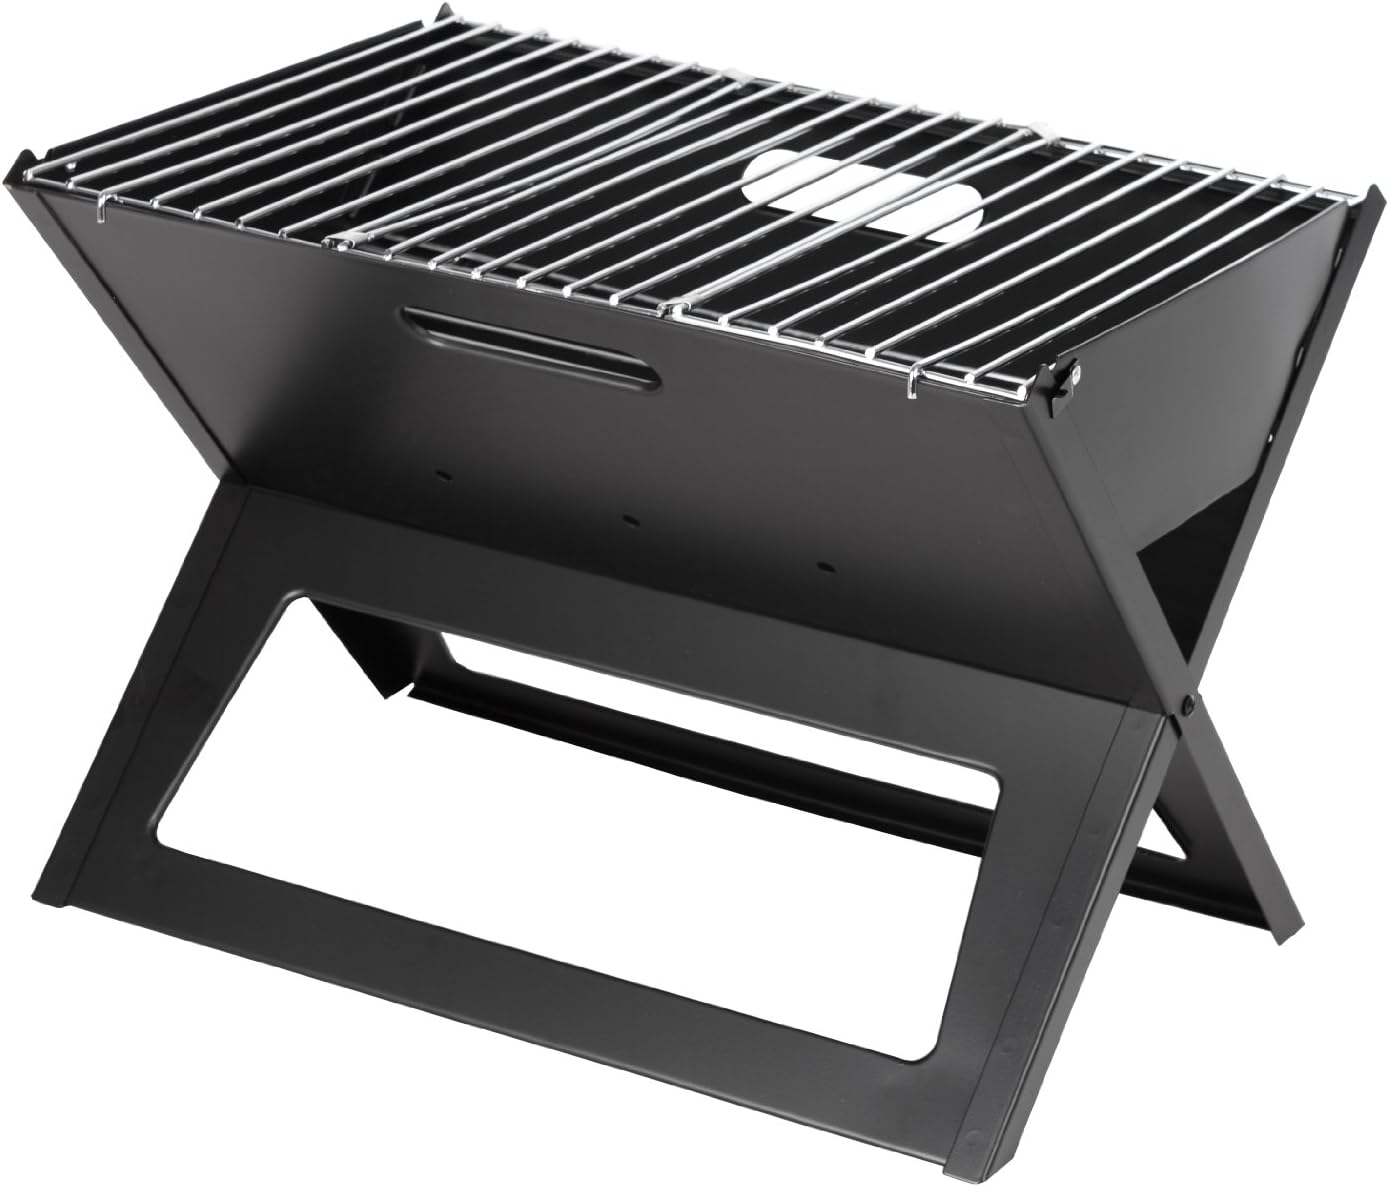 Camping Campfire Grill, Portable Folding Charcoal Grills, Backpacking BBQ Grill, Easy Portability For Outdoor Barbecues Camping Traveling Picnics Garden Beach Party - Delicate Leather